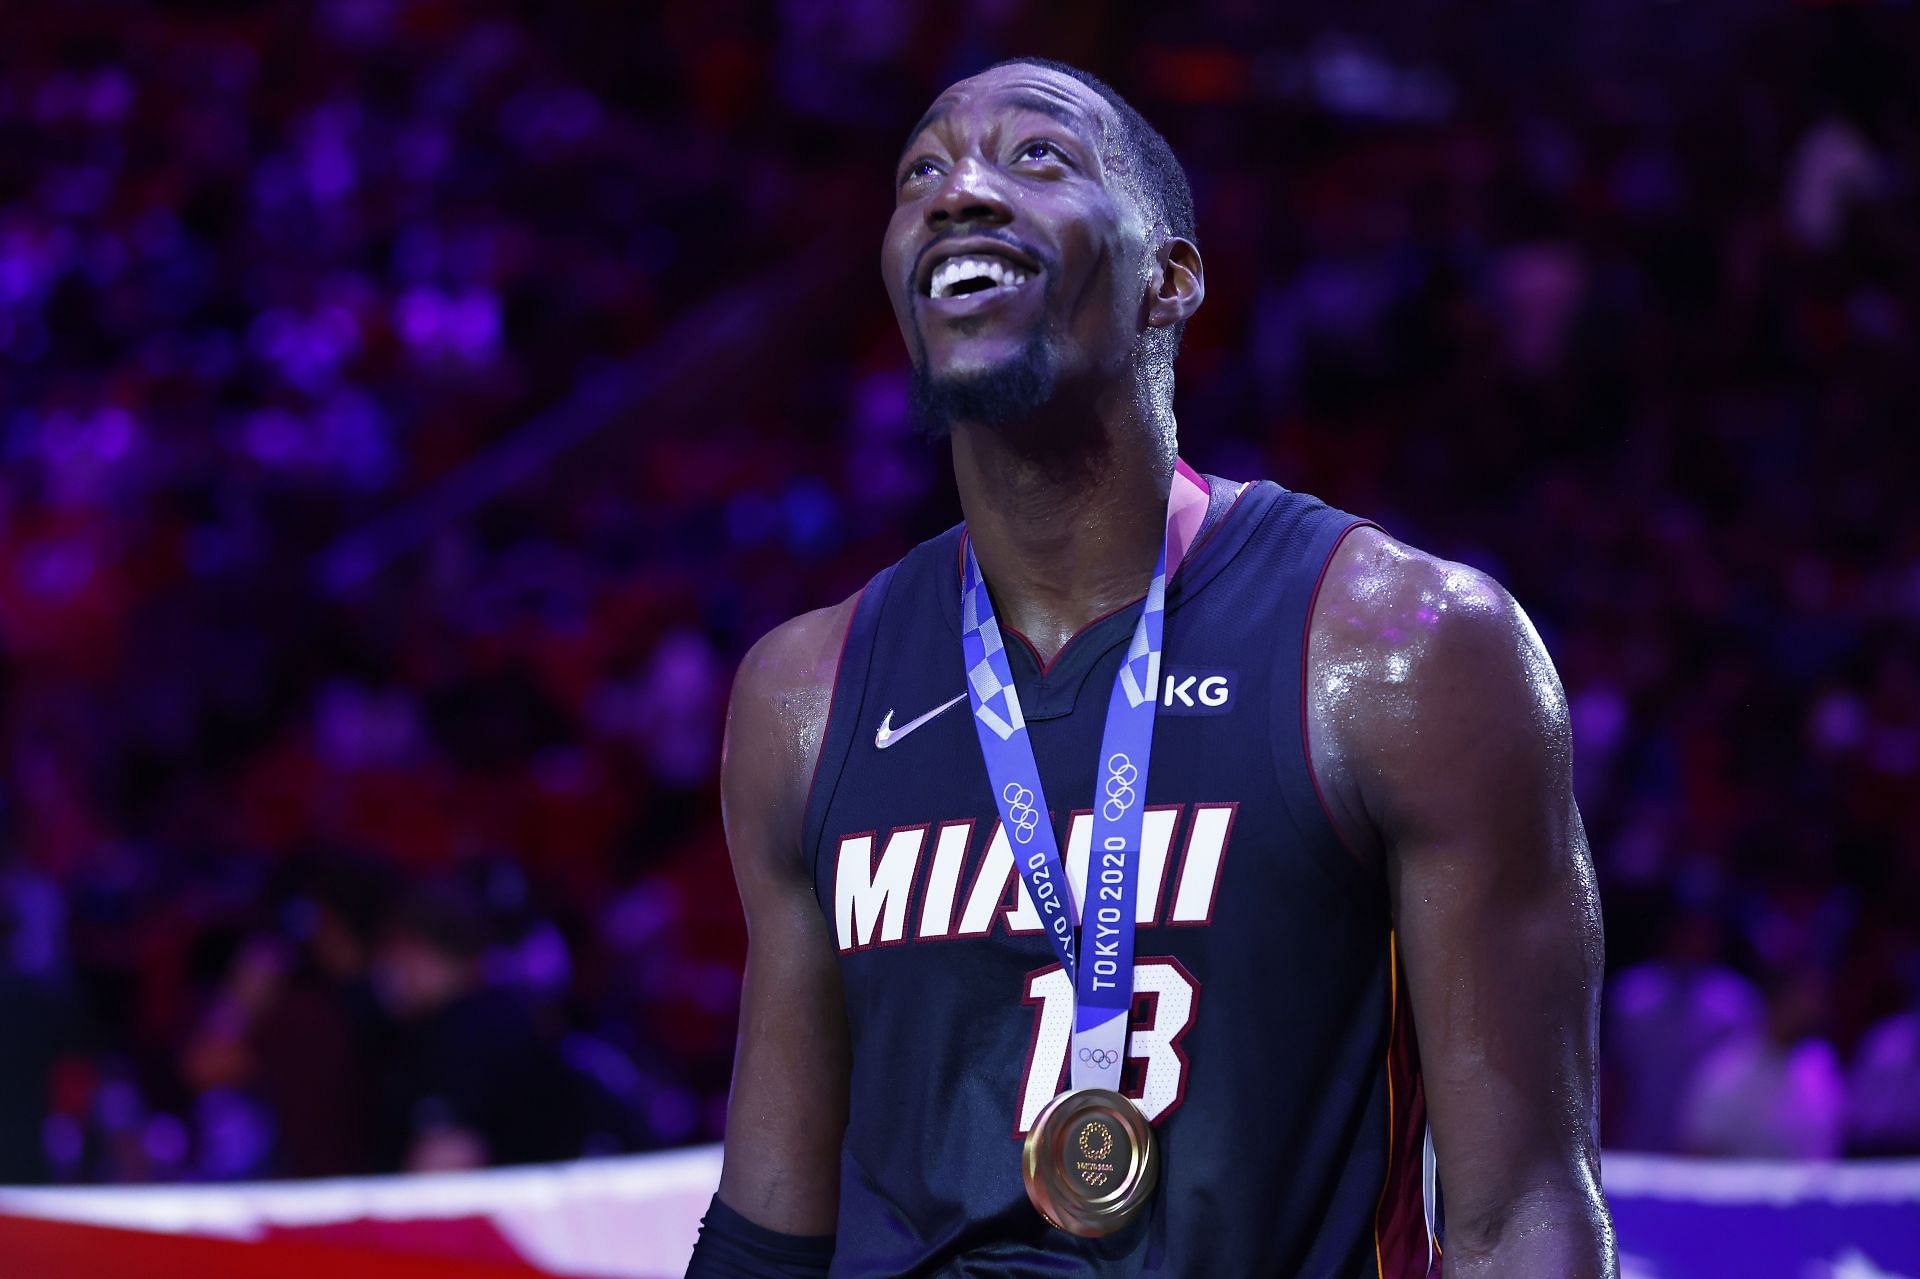 Bam Adebayo has been excellent for the Miami Heat on the defensive end.